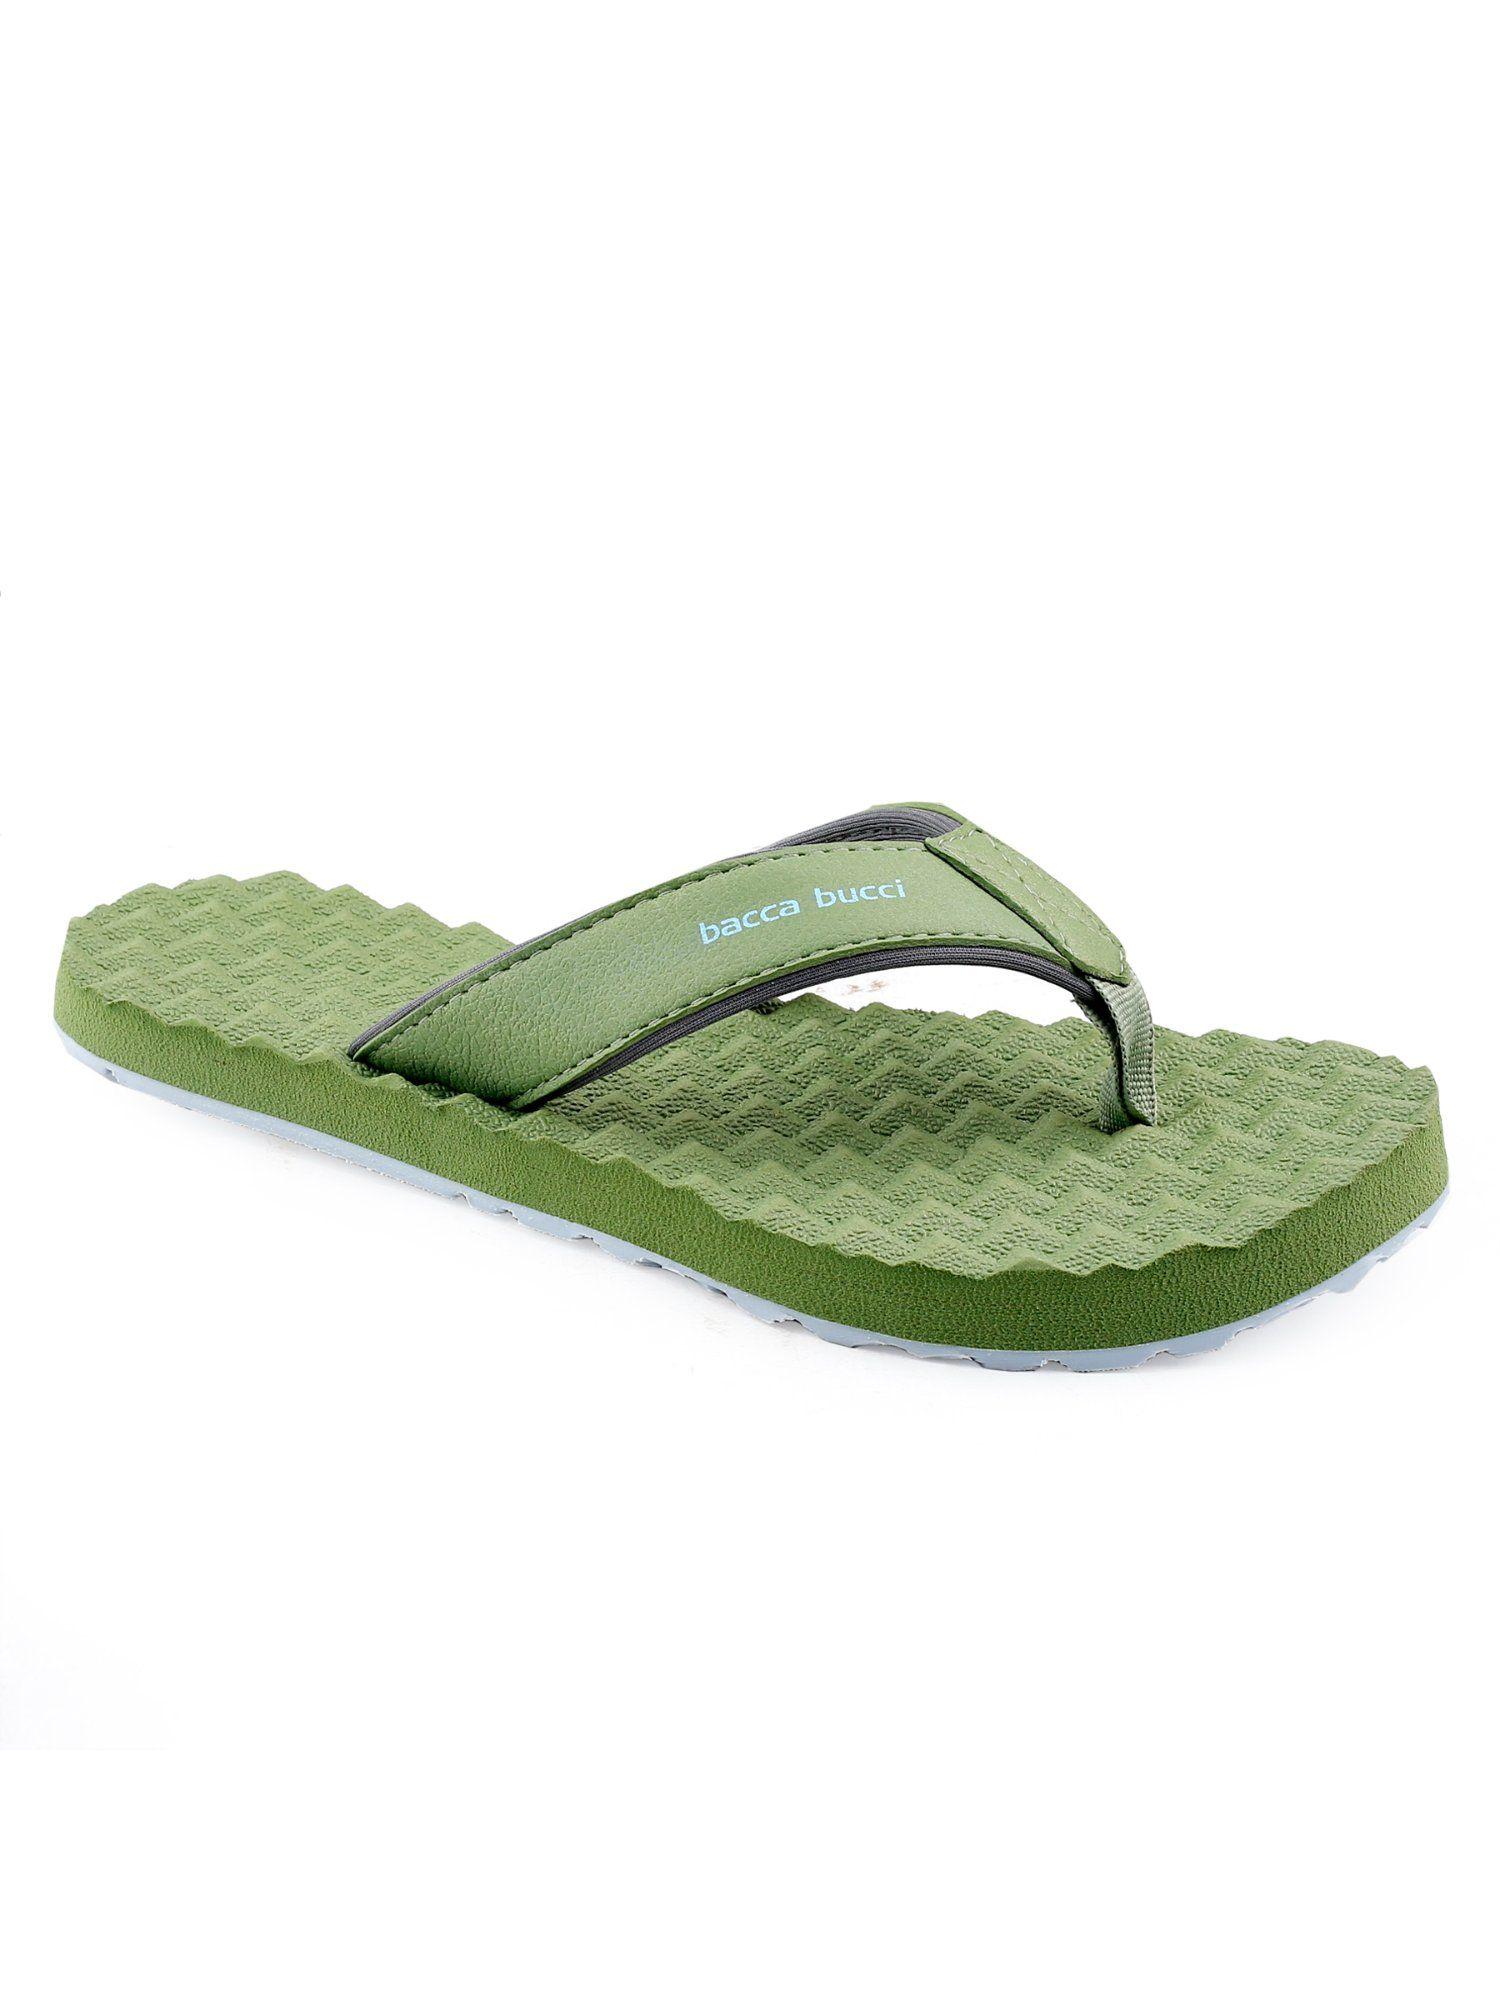 island cloud flipflops with non-slip rubber outsole-olive